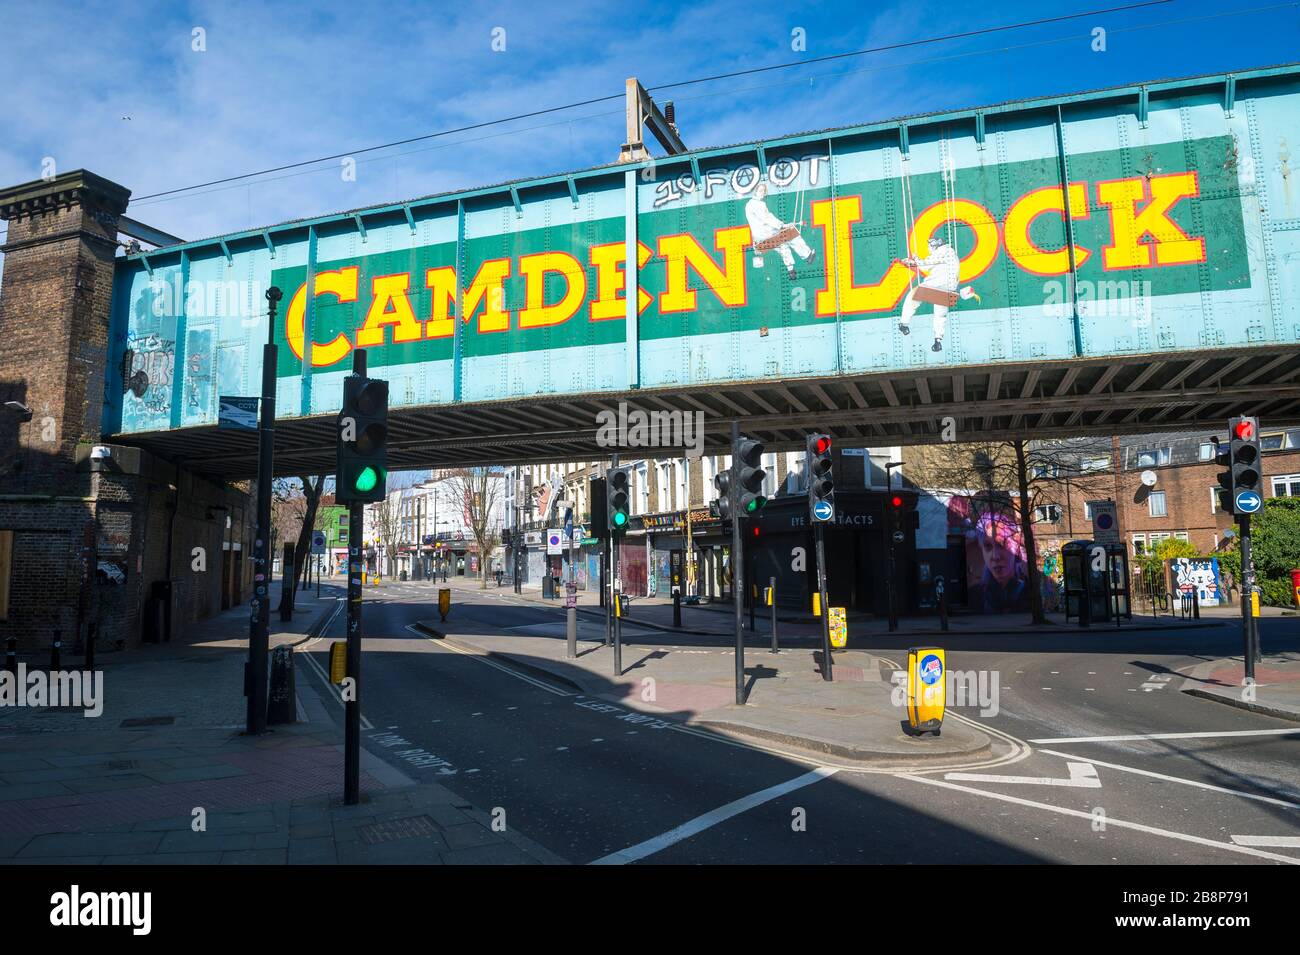 LONDON - 22 MARCH, 2020: Usually bustling streets around the famous Camden Market are now deserted while the city suffers from Coronavirus lockdown. Stock Photo